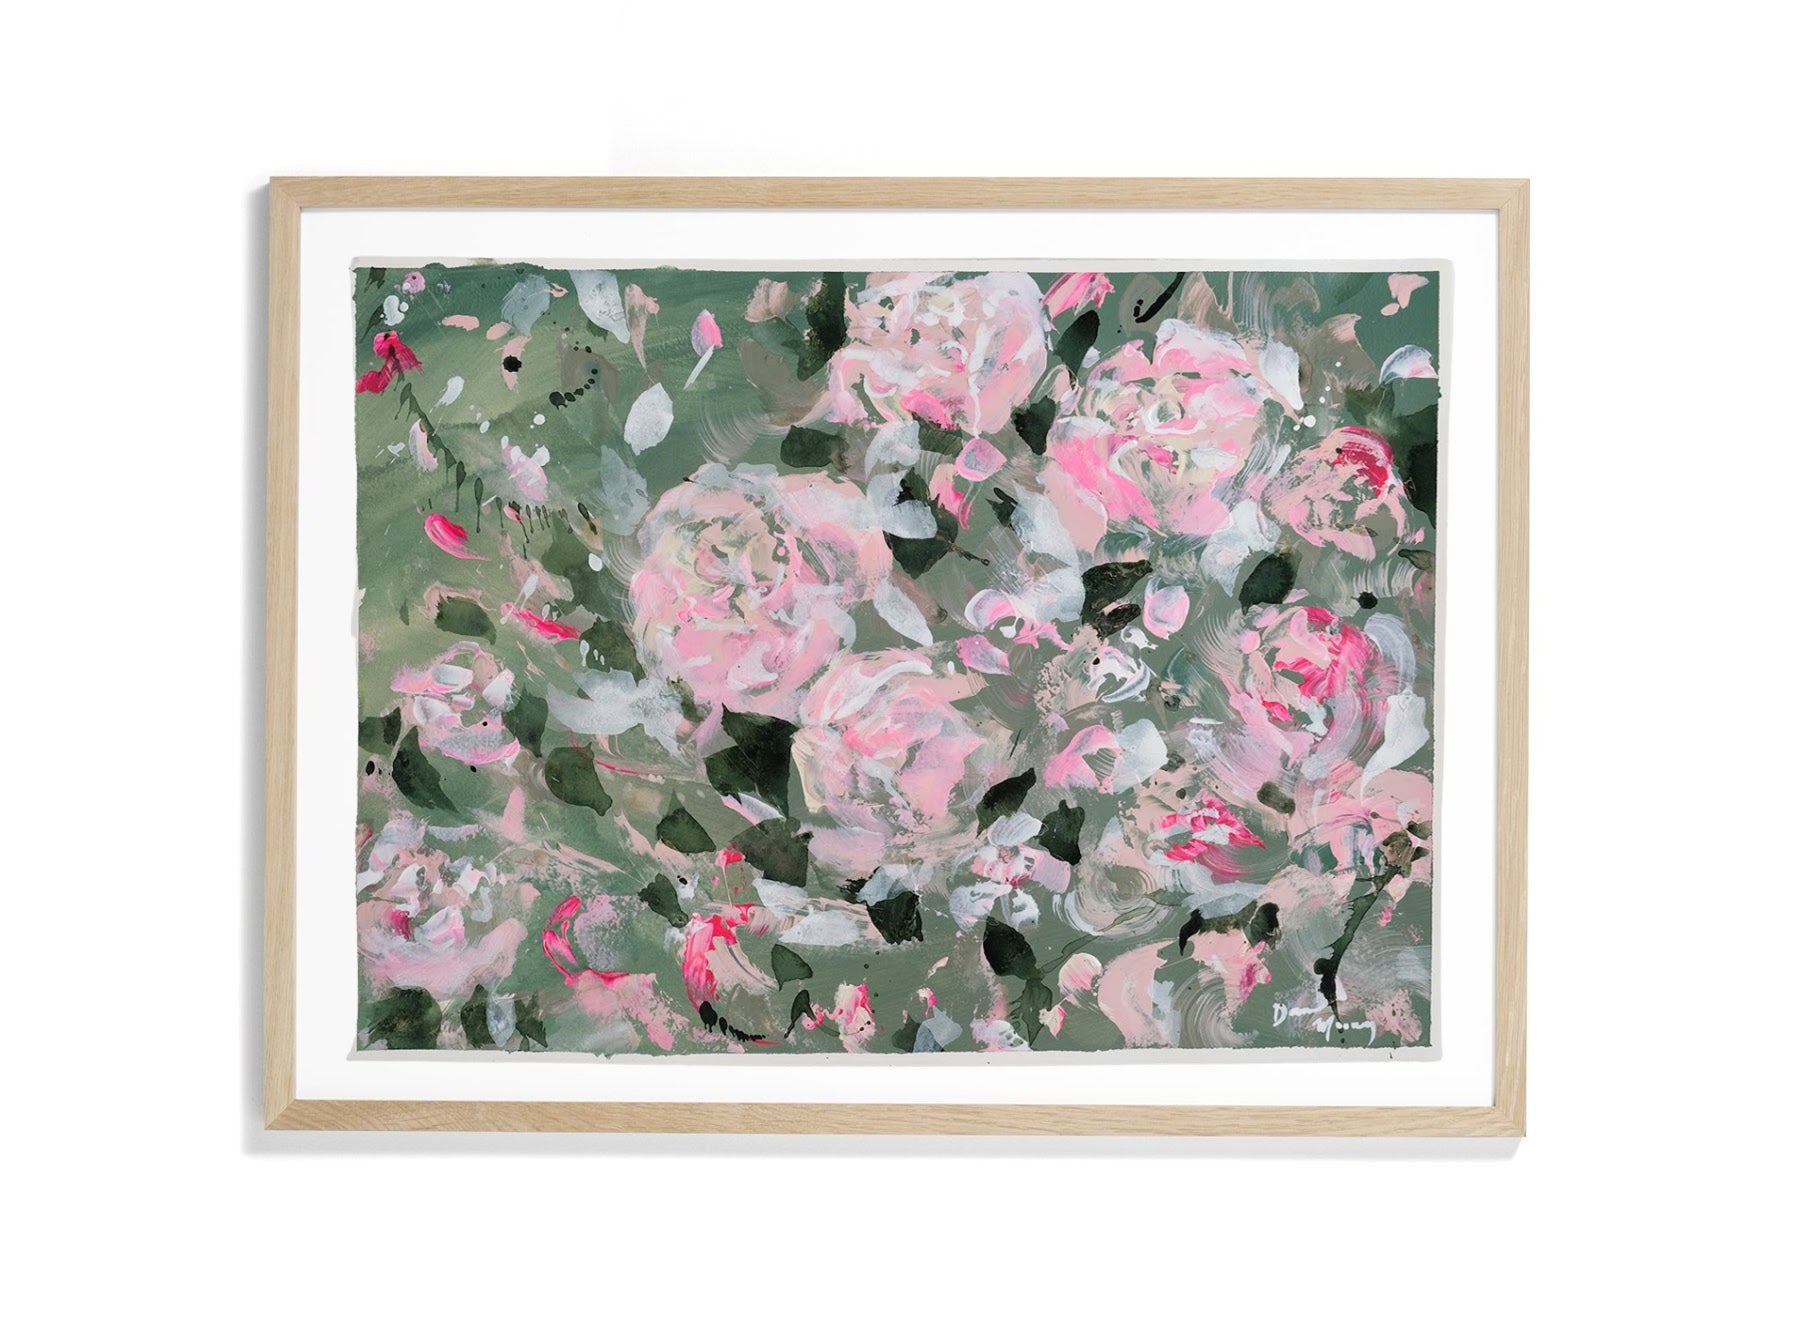 A fun and uplifting abstracted floral painting on paper, shown here in a light wooden frame.  With a saje green background, shades of pastel and neon pinks pop as they seemingly float in the wind.  Abstracted petals from shapes and movement that excites the viewer, and invites positive energy into your home. 